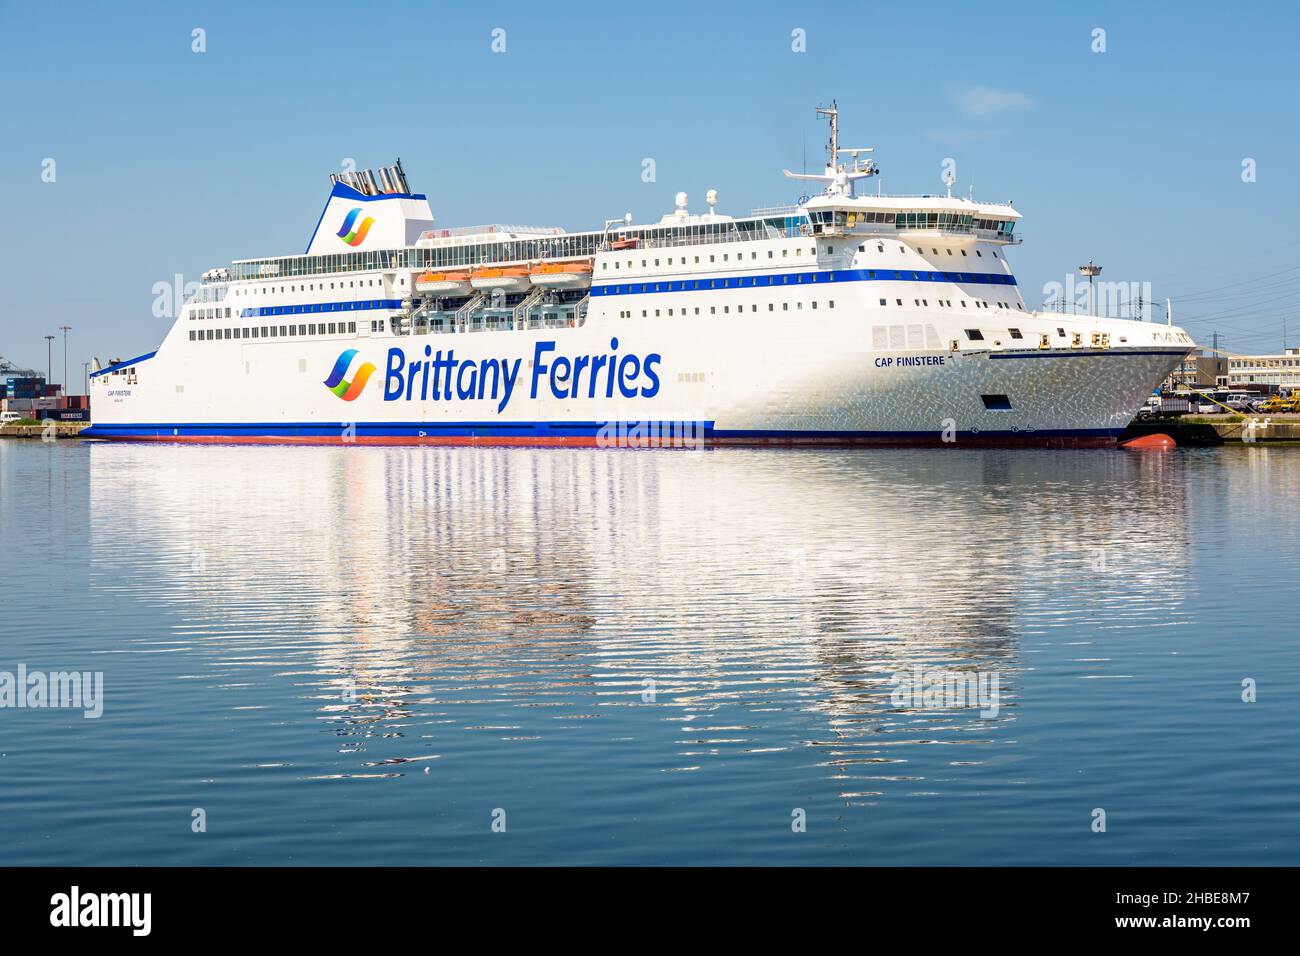 The ferry boat 'Cap Finistere' from the Brittany Ferries company moored in the port of Le Havre. Stock Photo